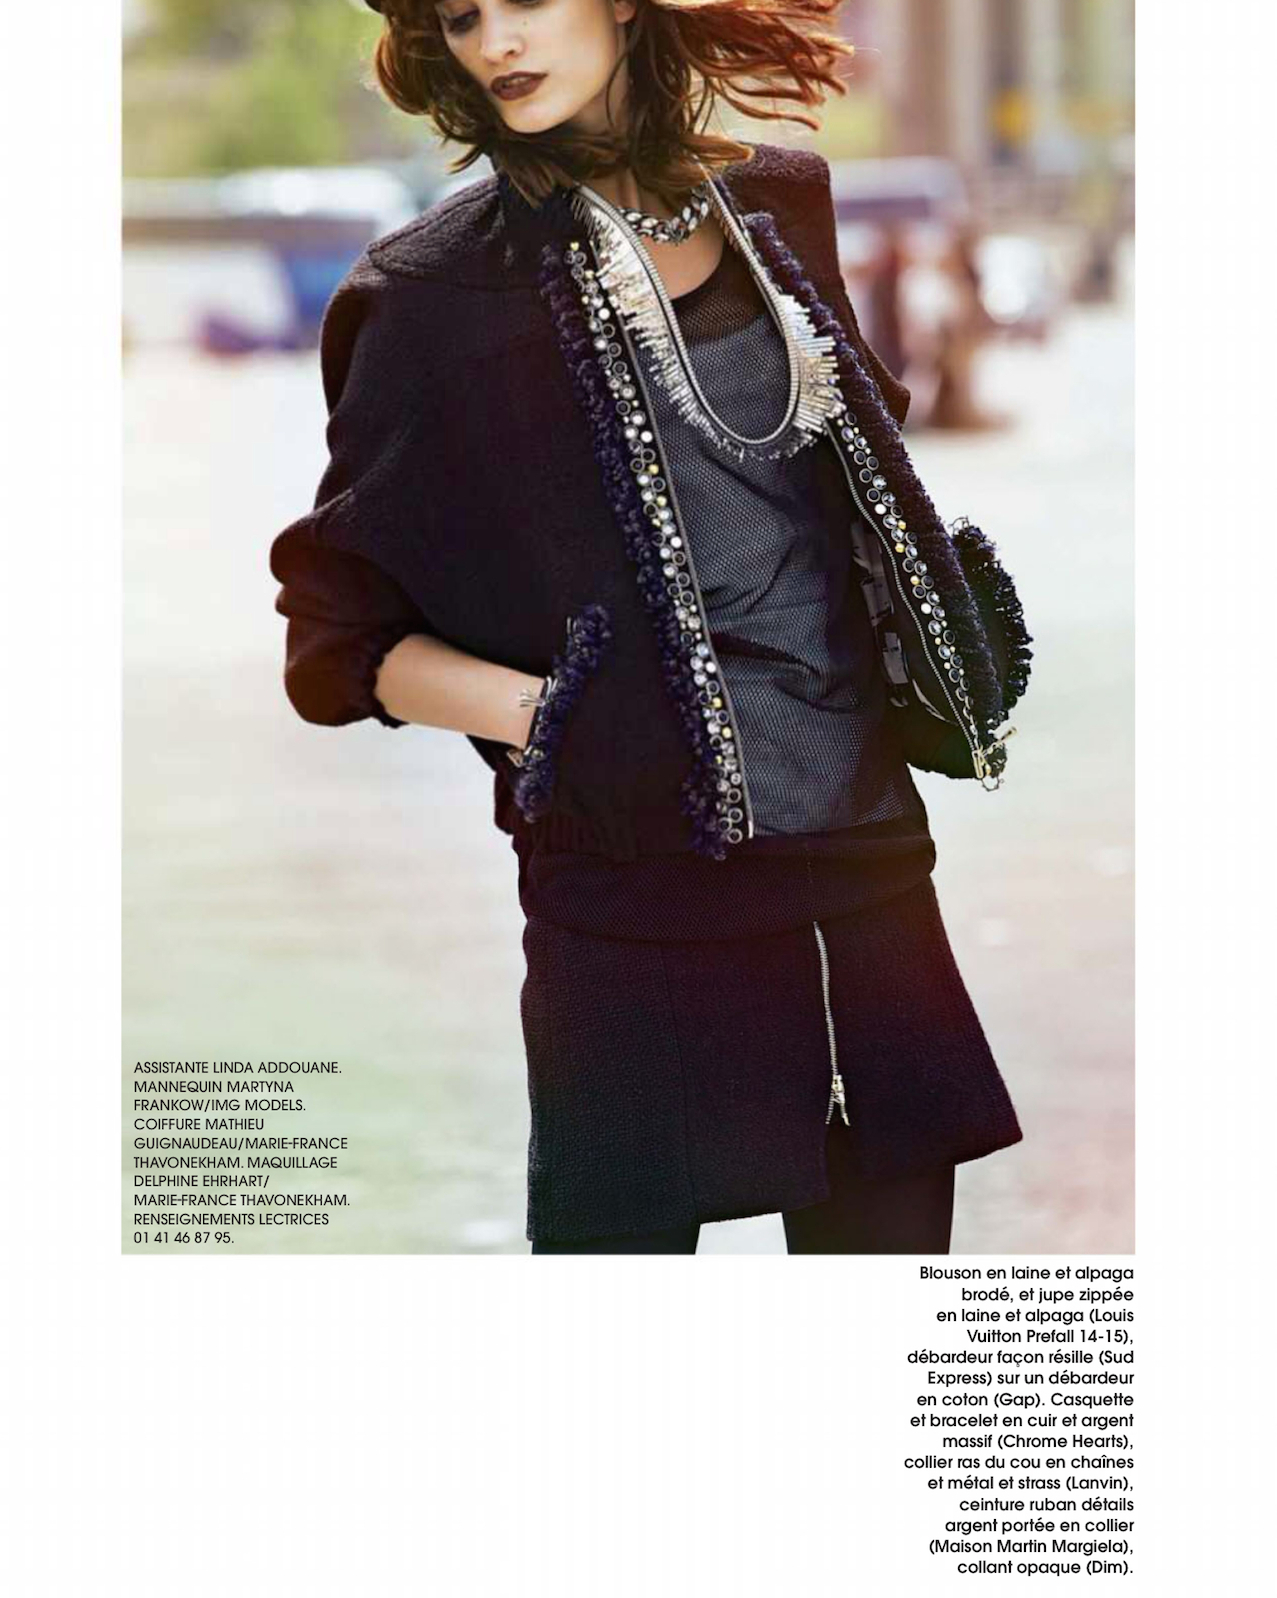 tendances capitales: martyna frankow by taki bibelas for marie claire ...